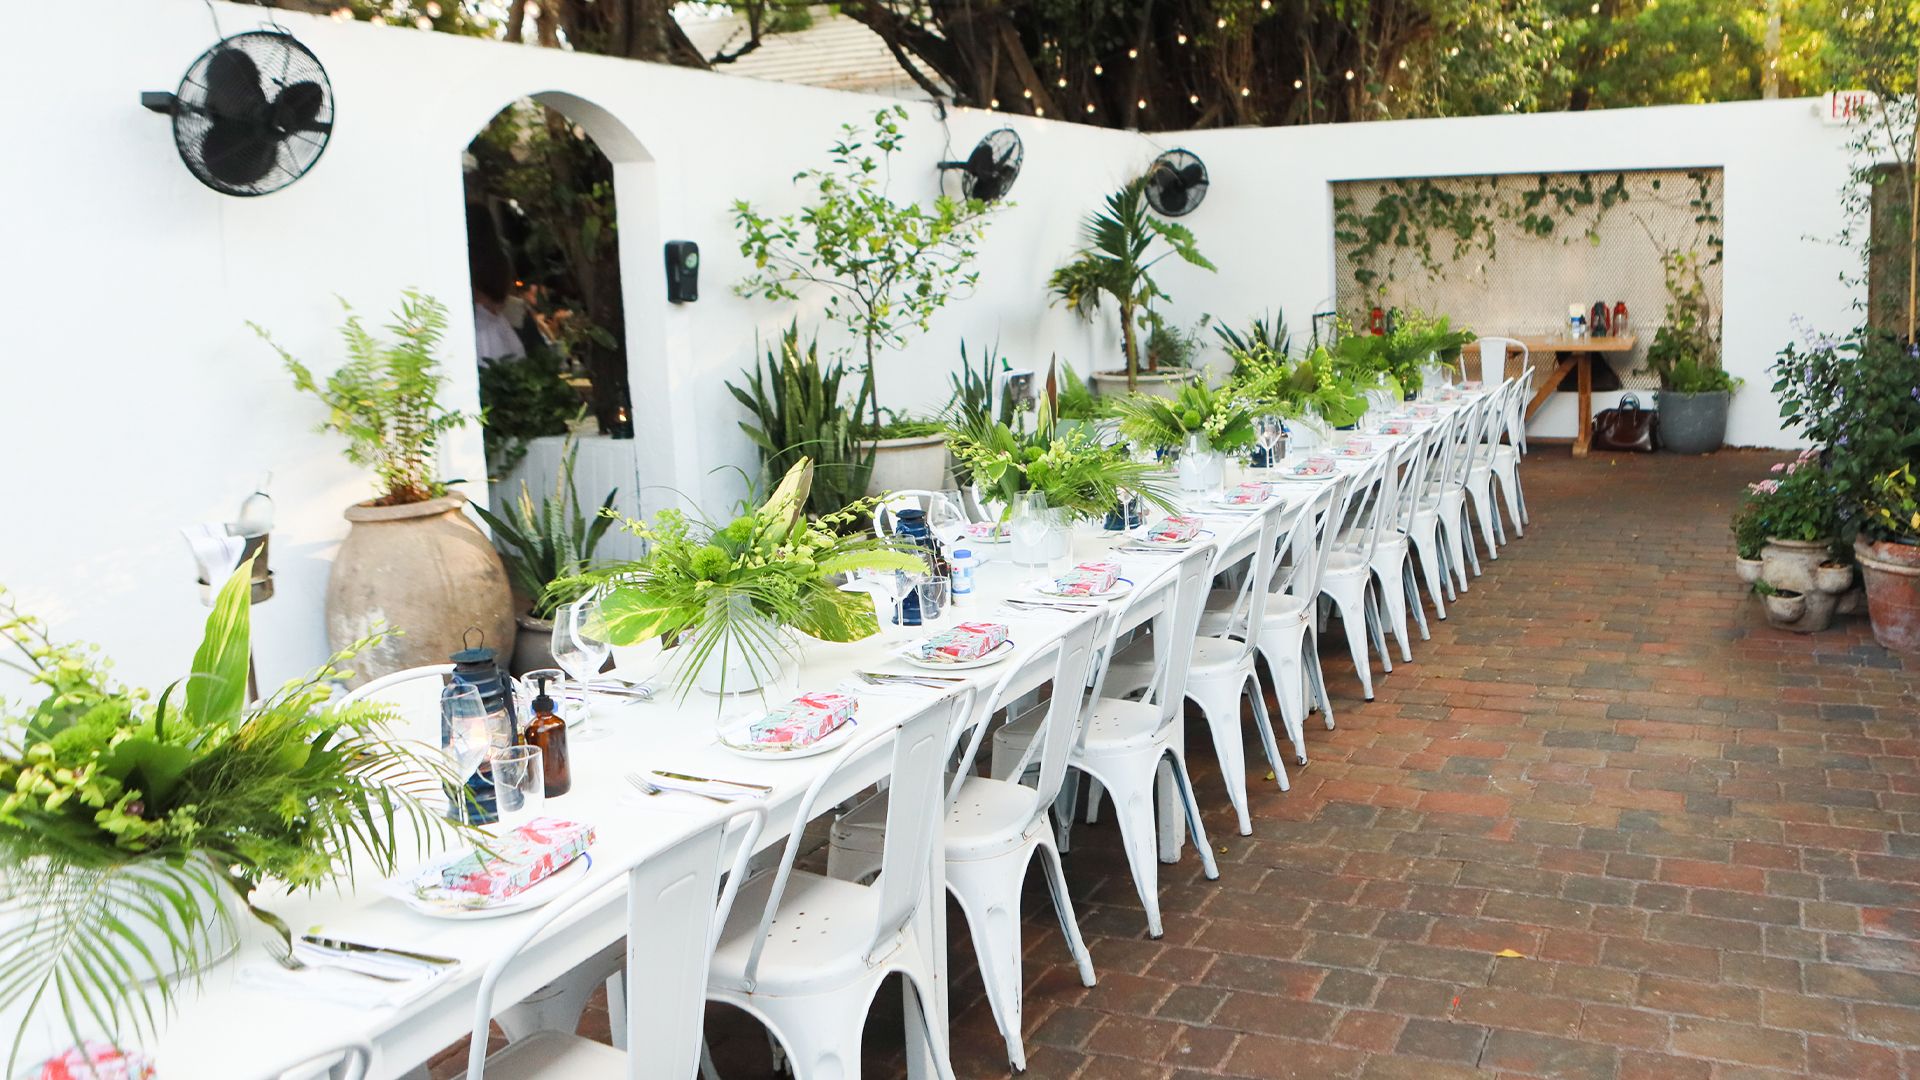 Long white table and chairs in brick courtyard, greenery and plants along table and walls